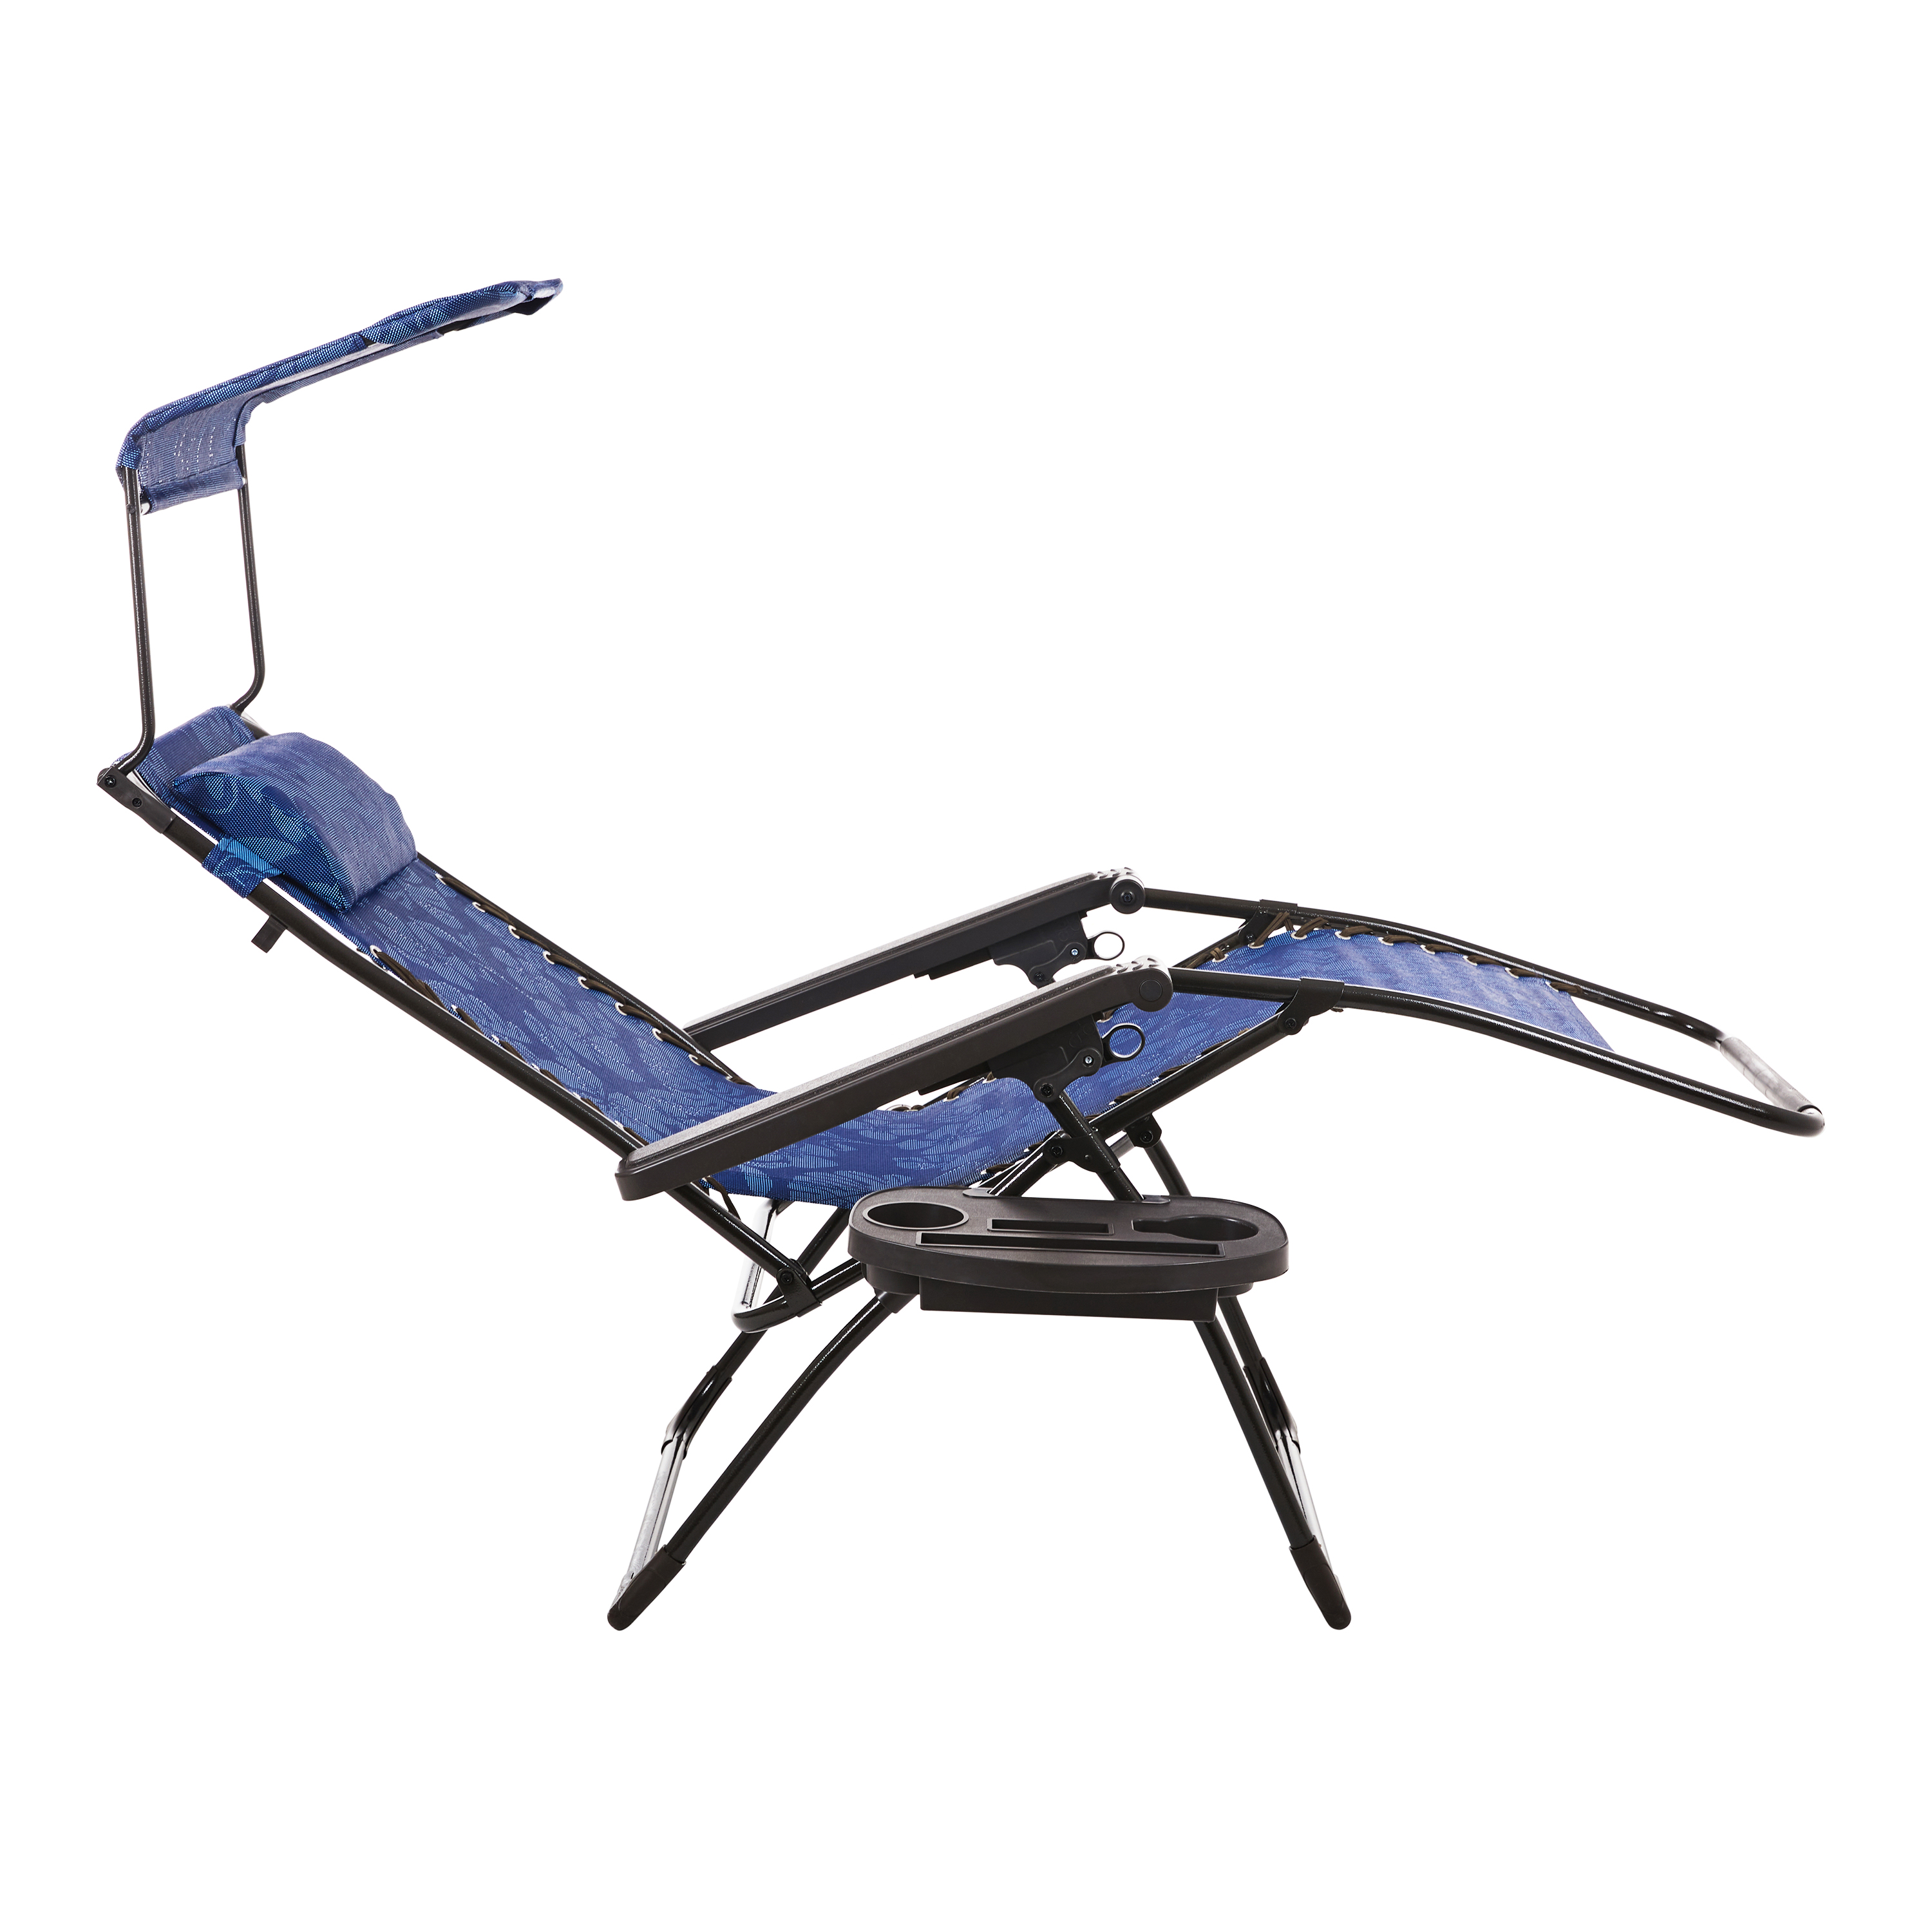 Bliss Hammocks Blue Flower 26" Wide Zero Gravity Chair w/ Adjustable Canopy, Drink Tray & Pillow, 300 Lb. Capacity - image 2 of 13